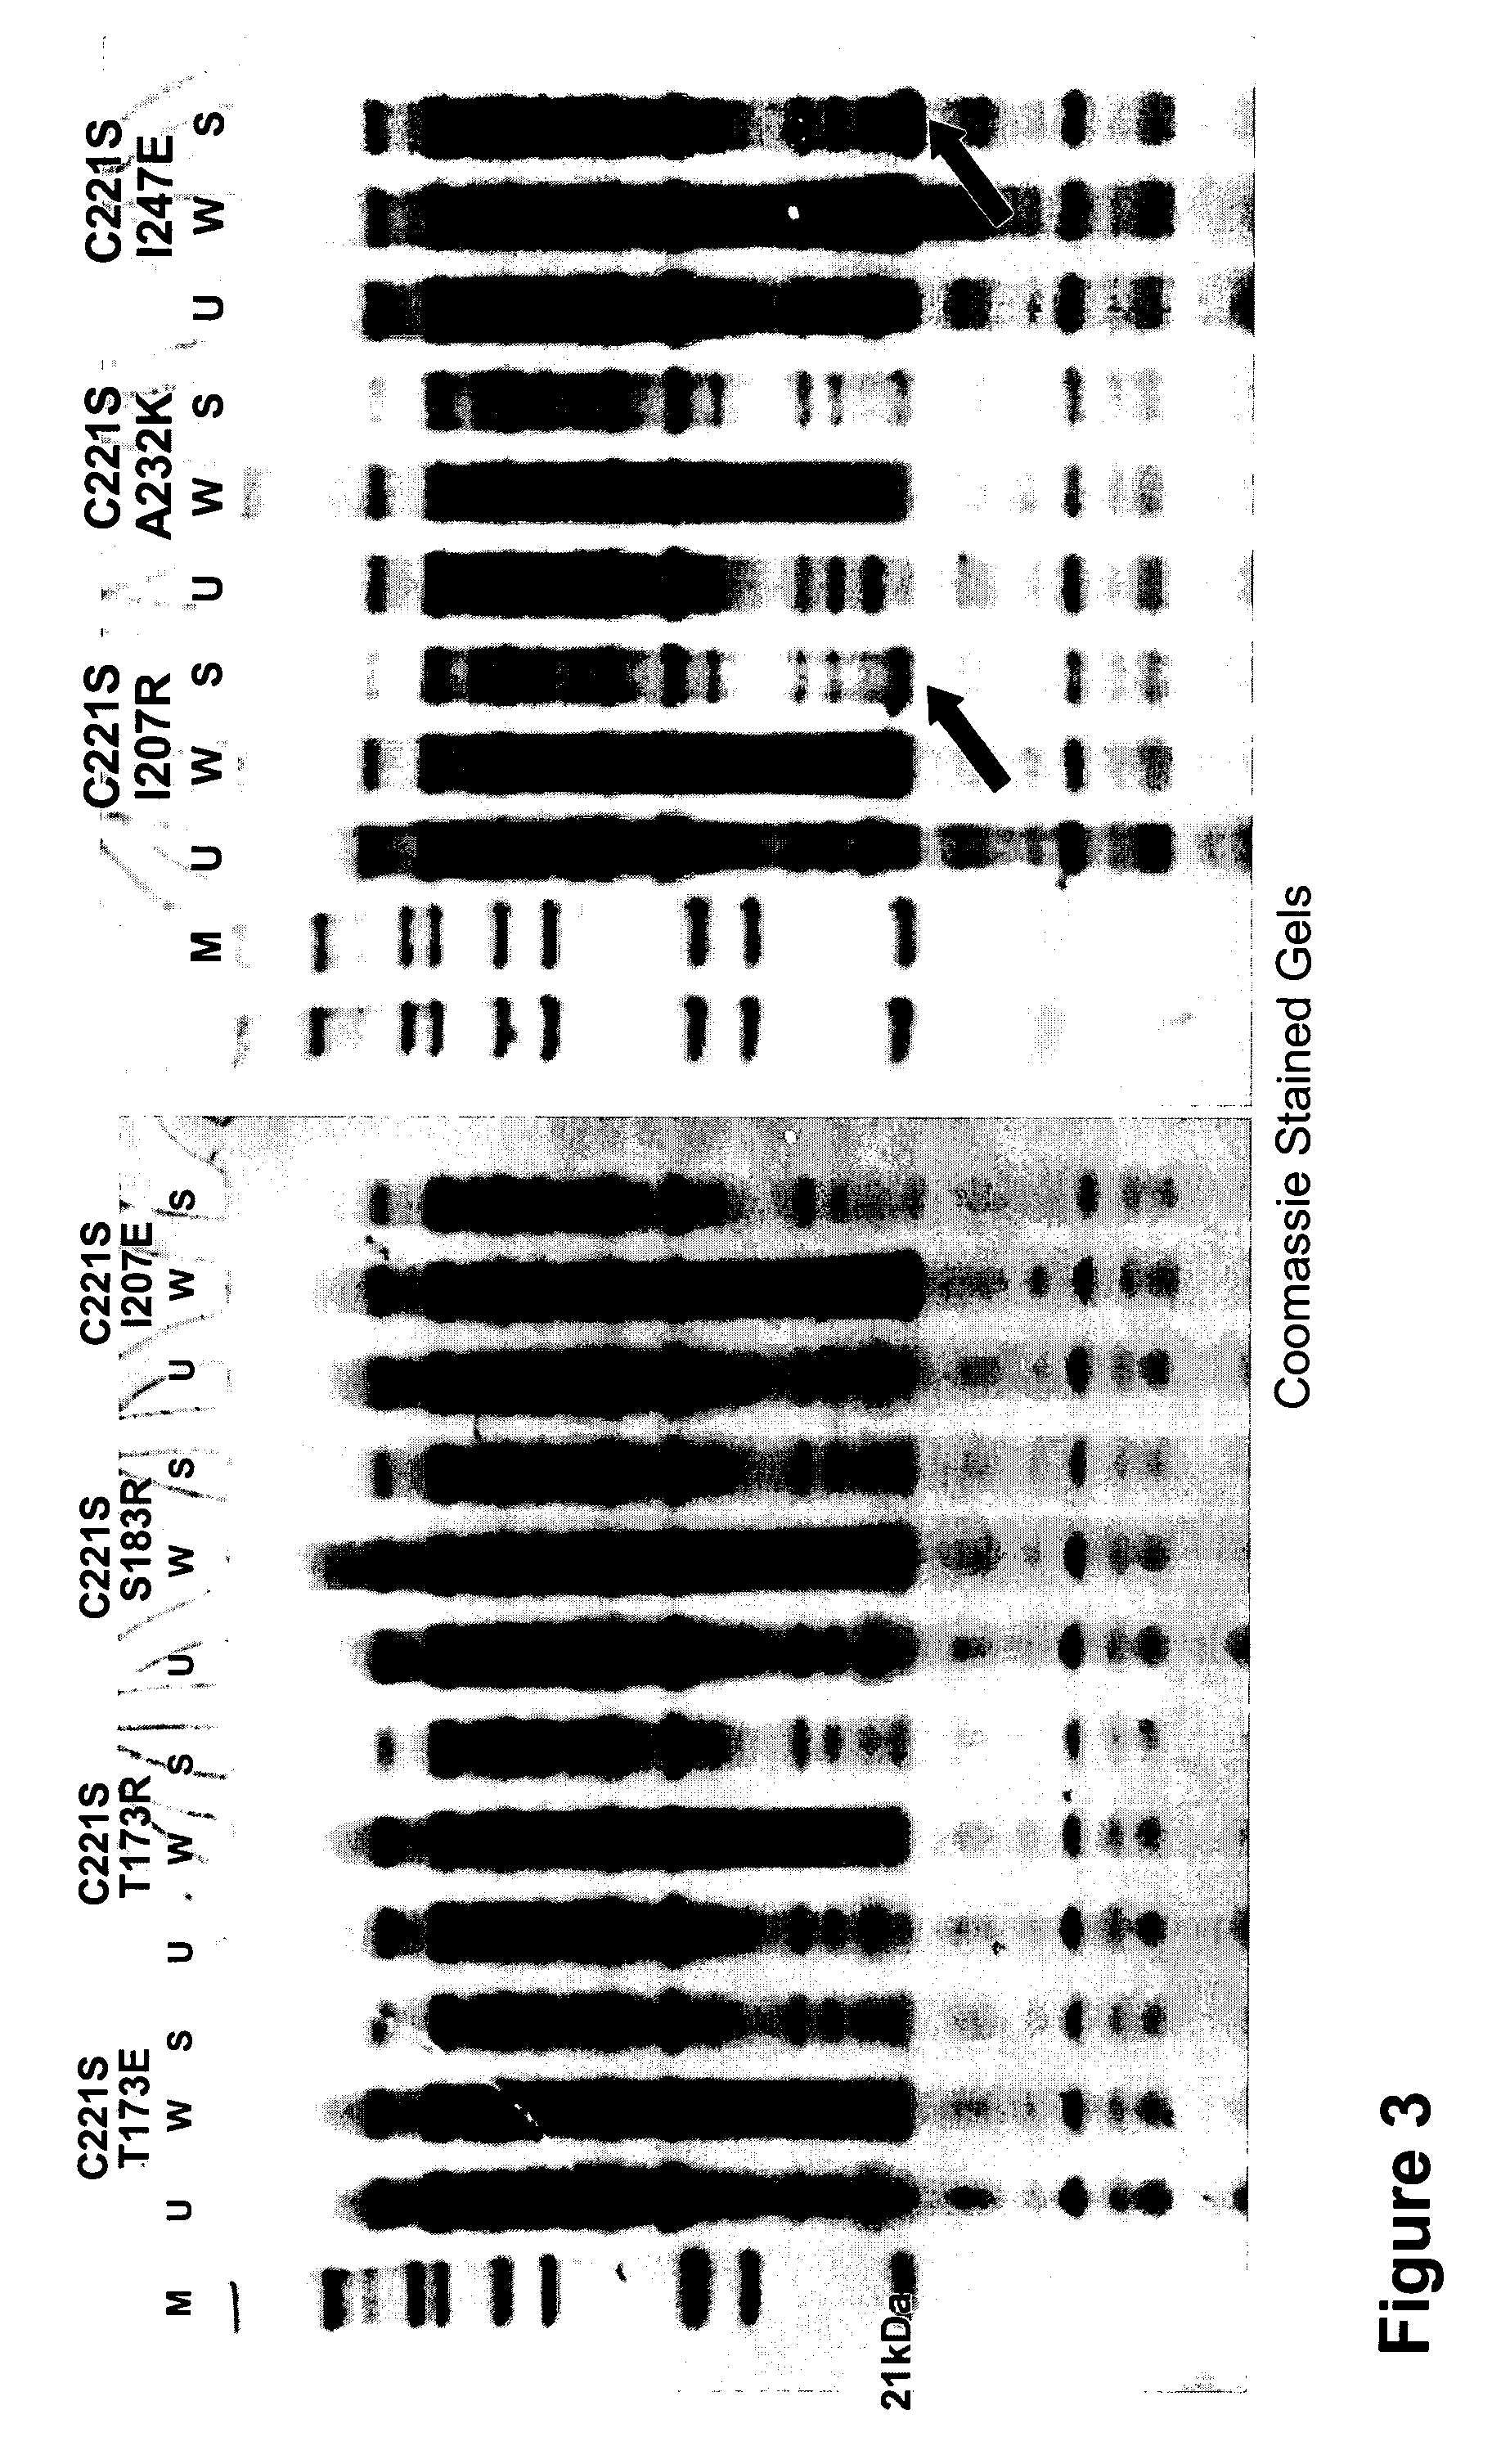 Variants of RANKL protein